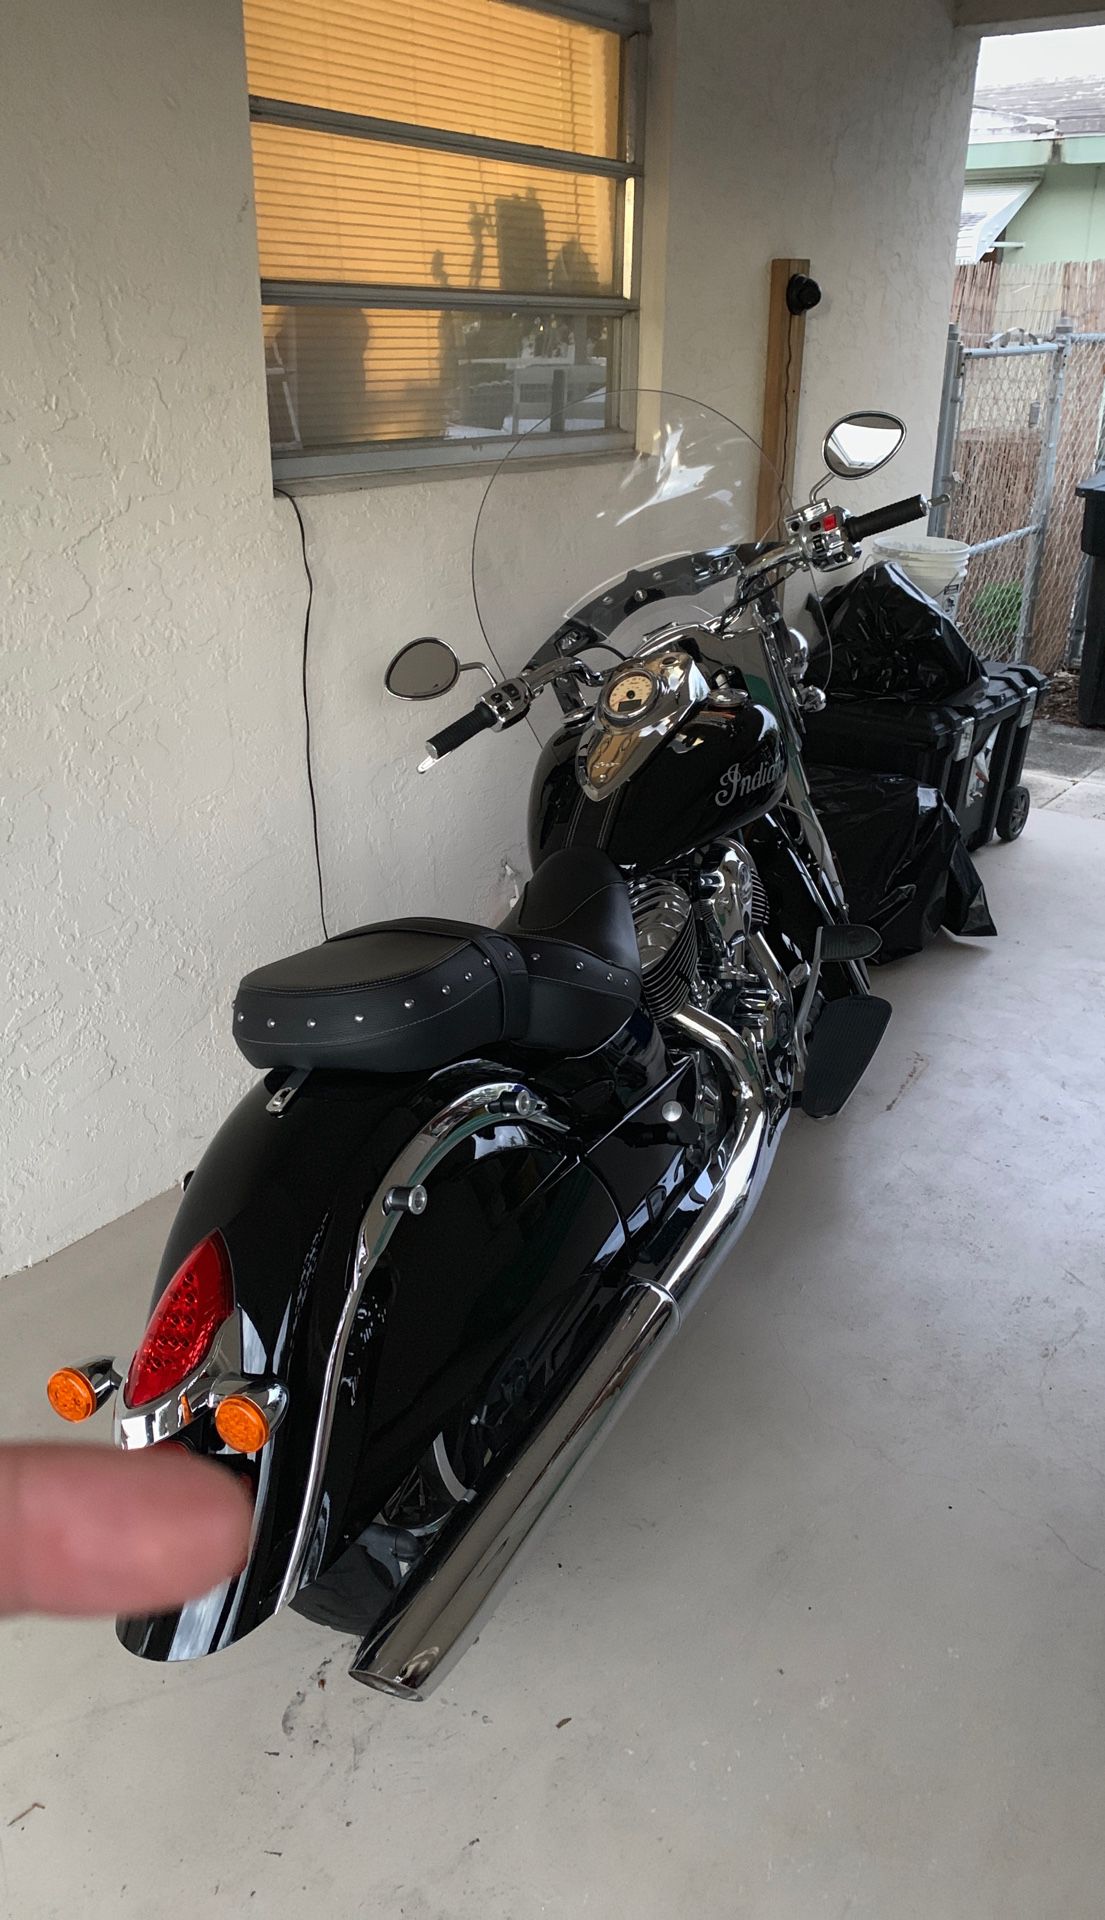 2014 Indian chief - thunder black - 1627 miles